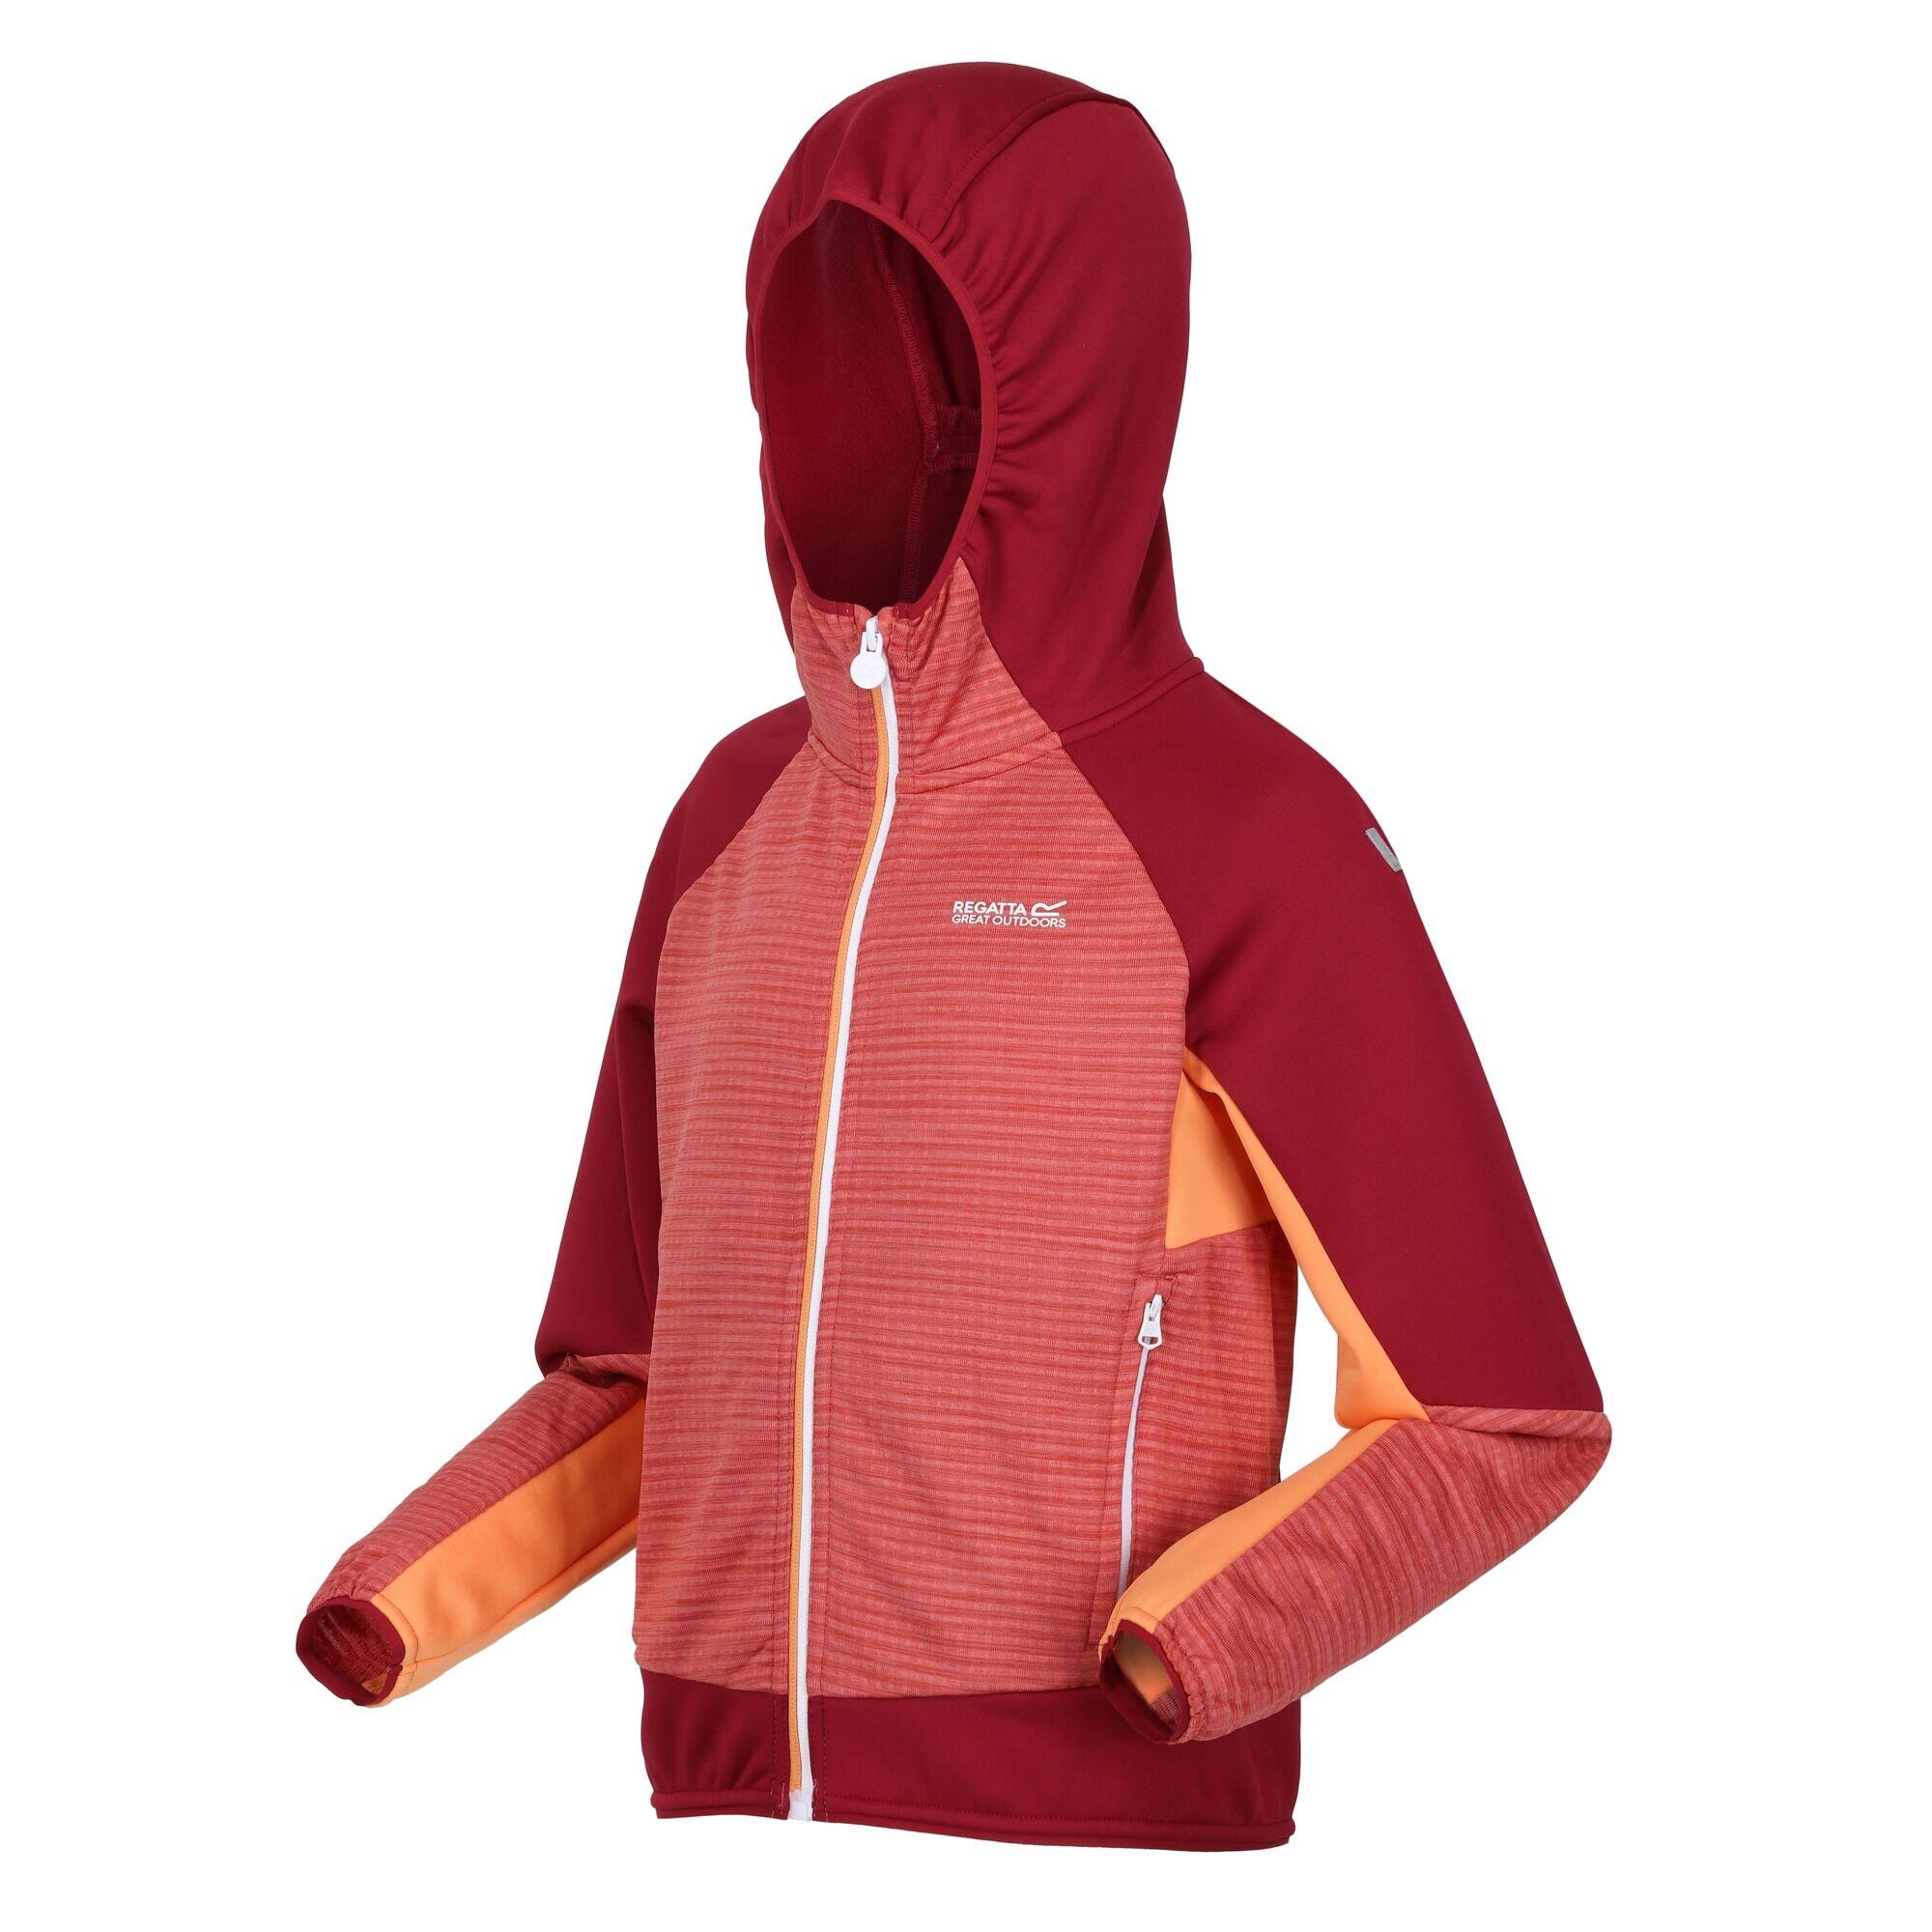 Childrens/Kids Prenton II Hooded Soft Shell Jacket (Mineral Red/Rumba Red) 3/5